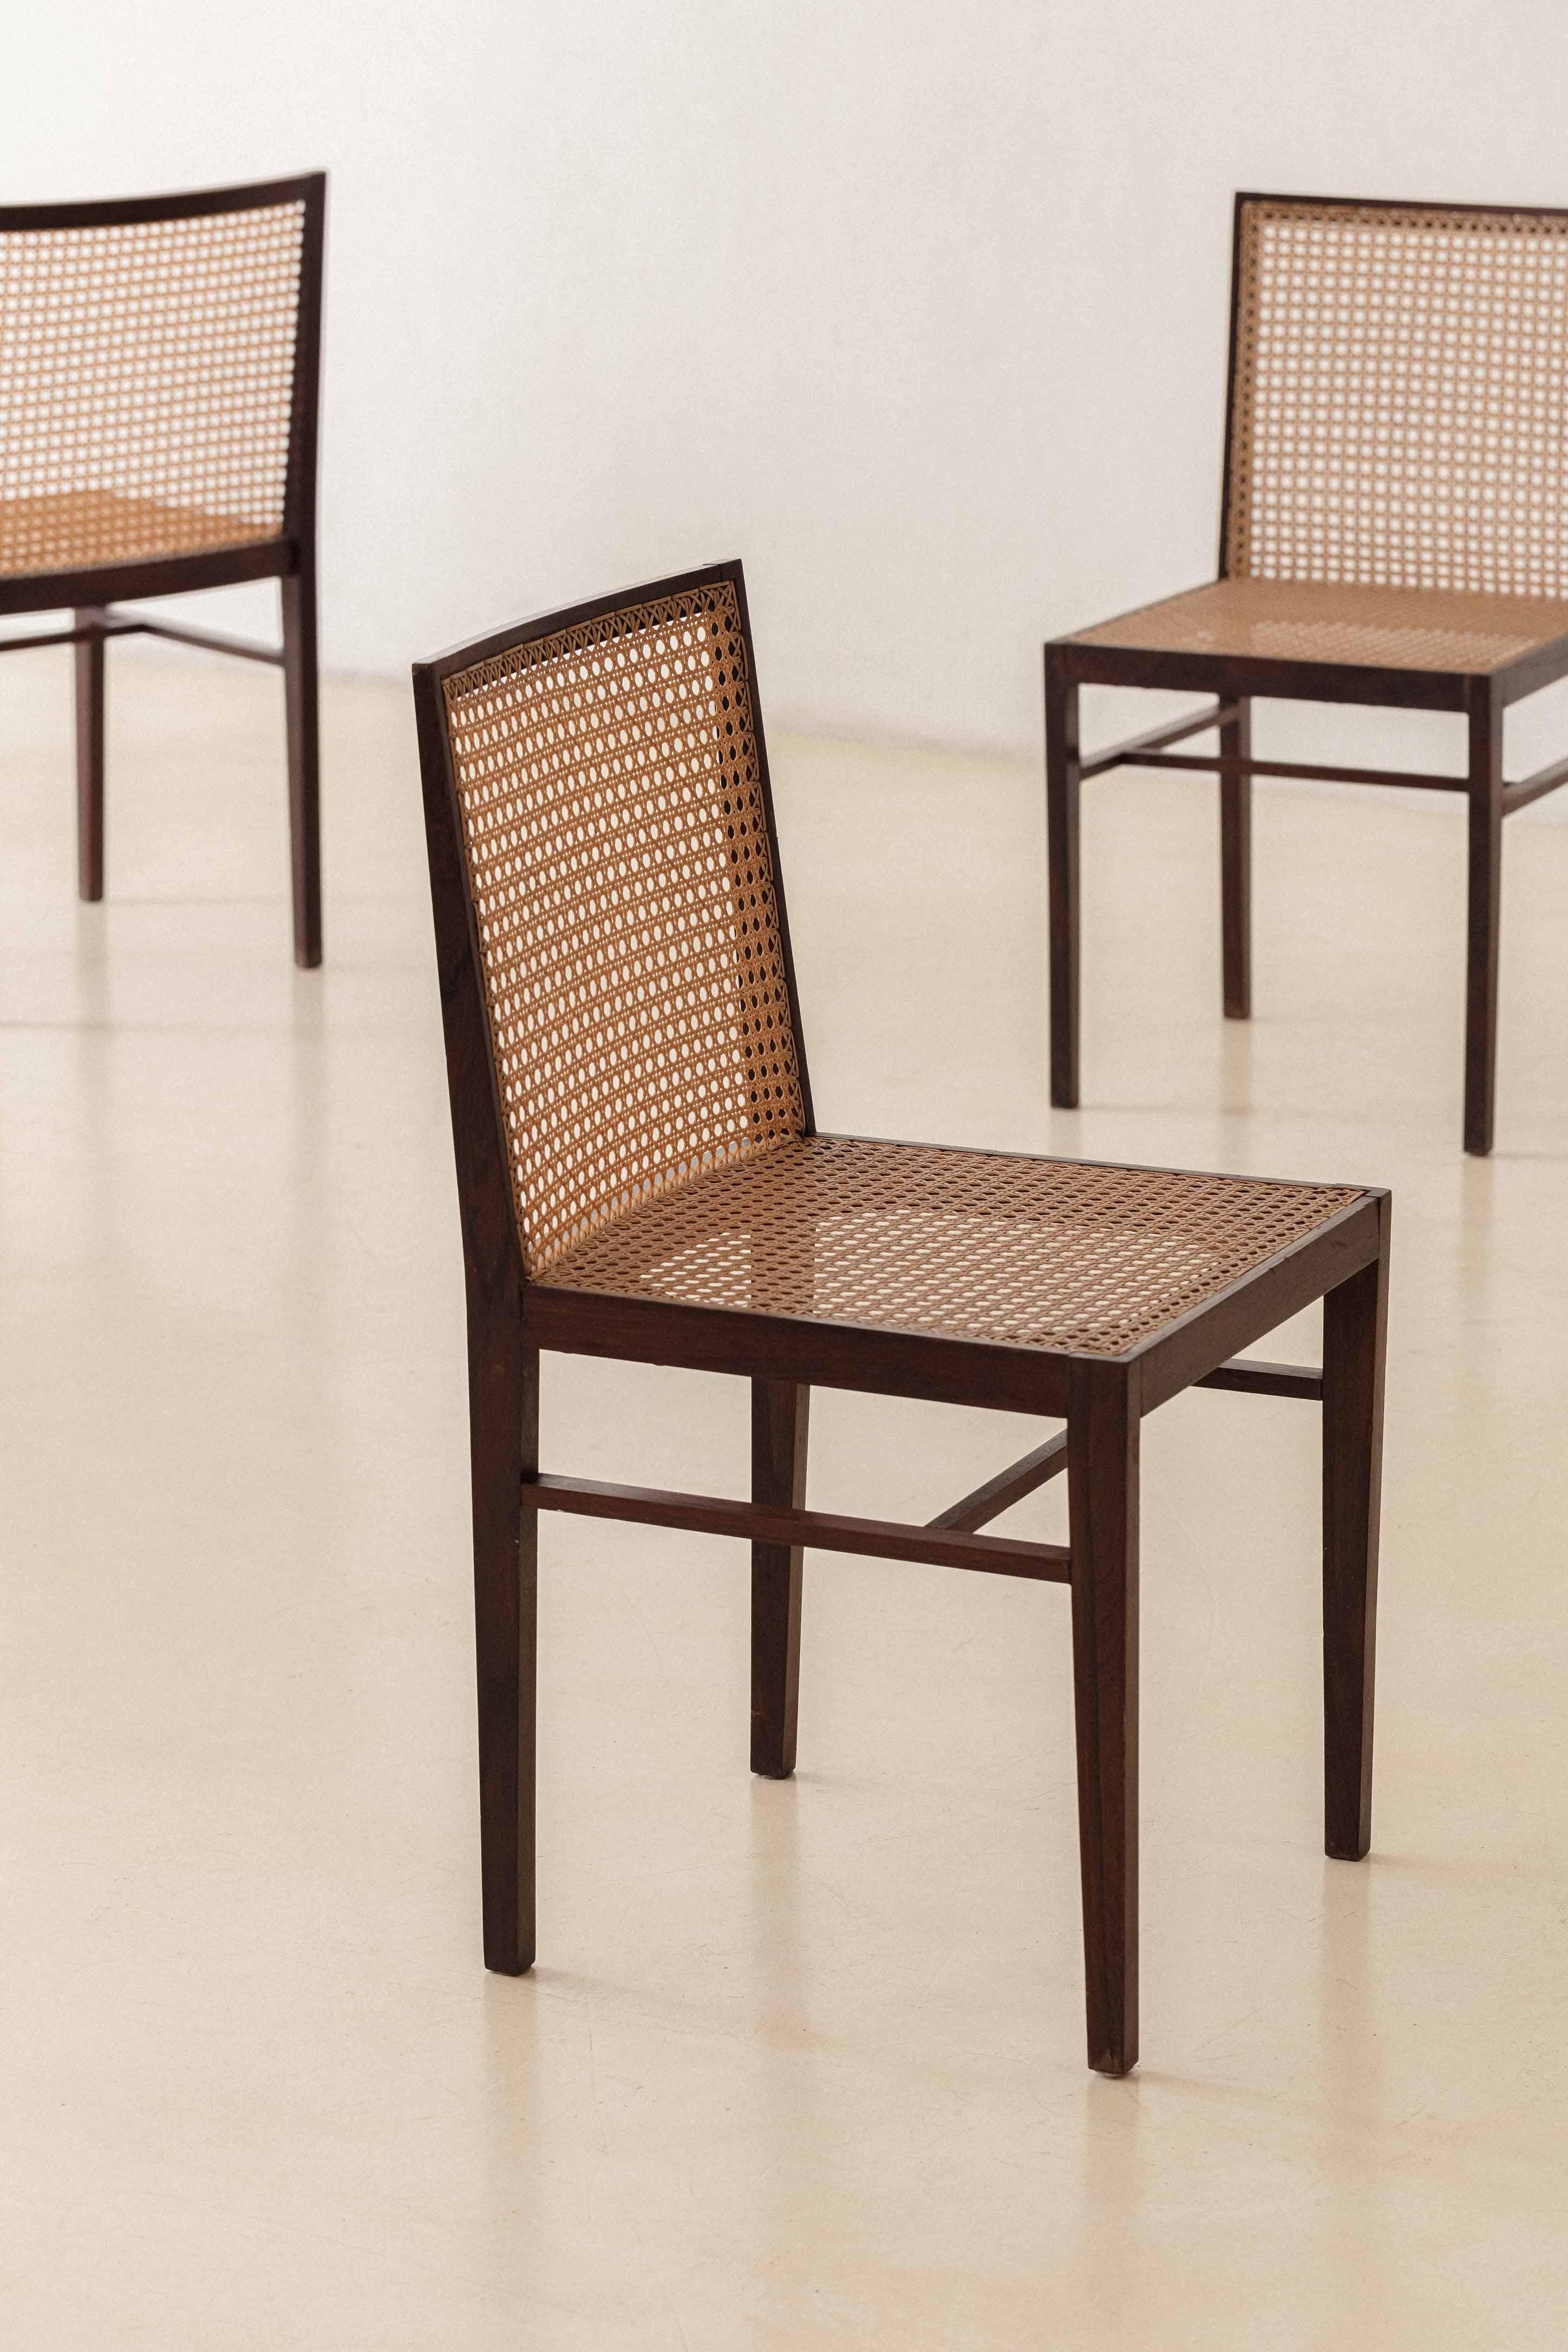 Set of Six Rosewood and Cane Dining Chairs, Brazilian Midcentury Design, 1960s For Sale 2